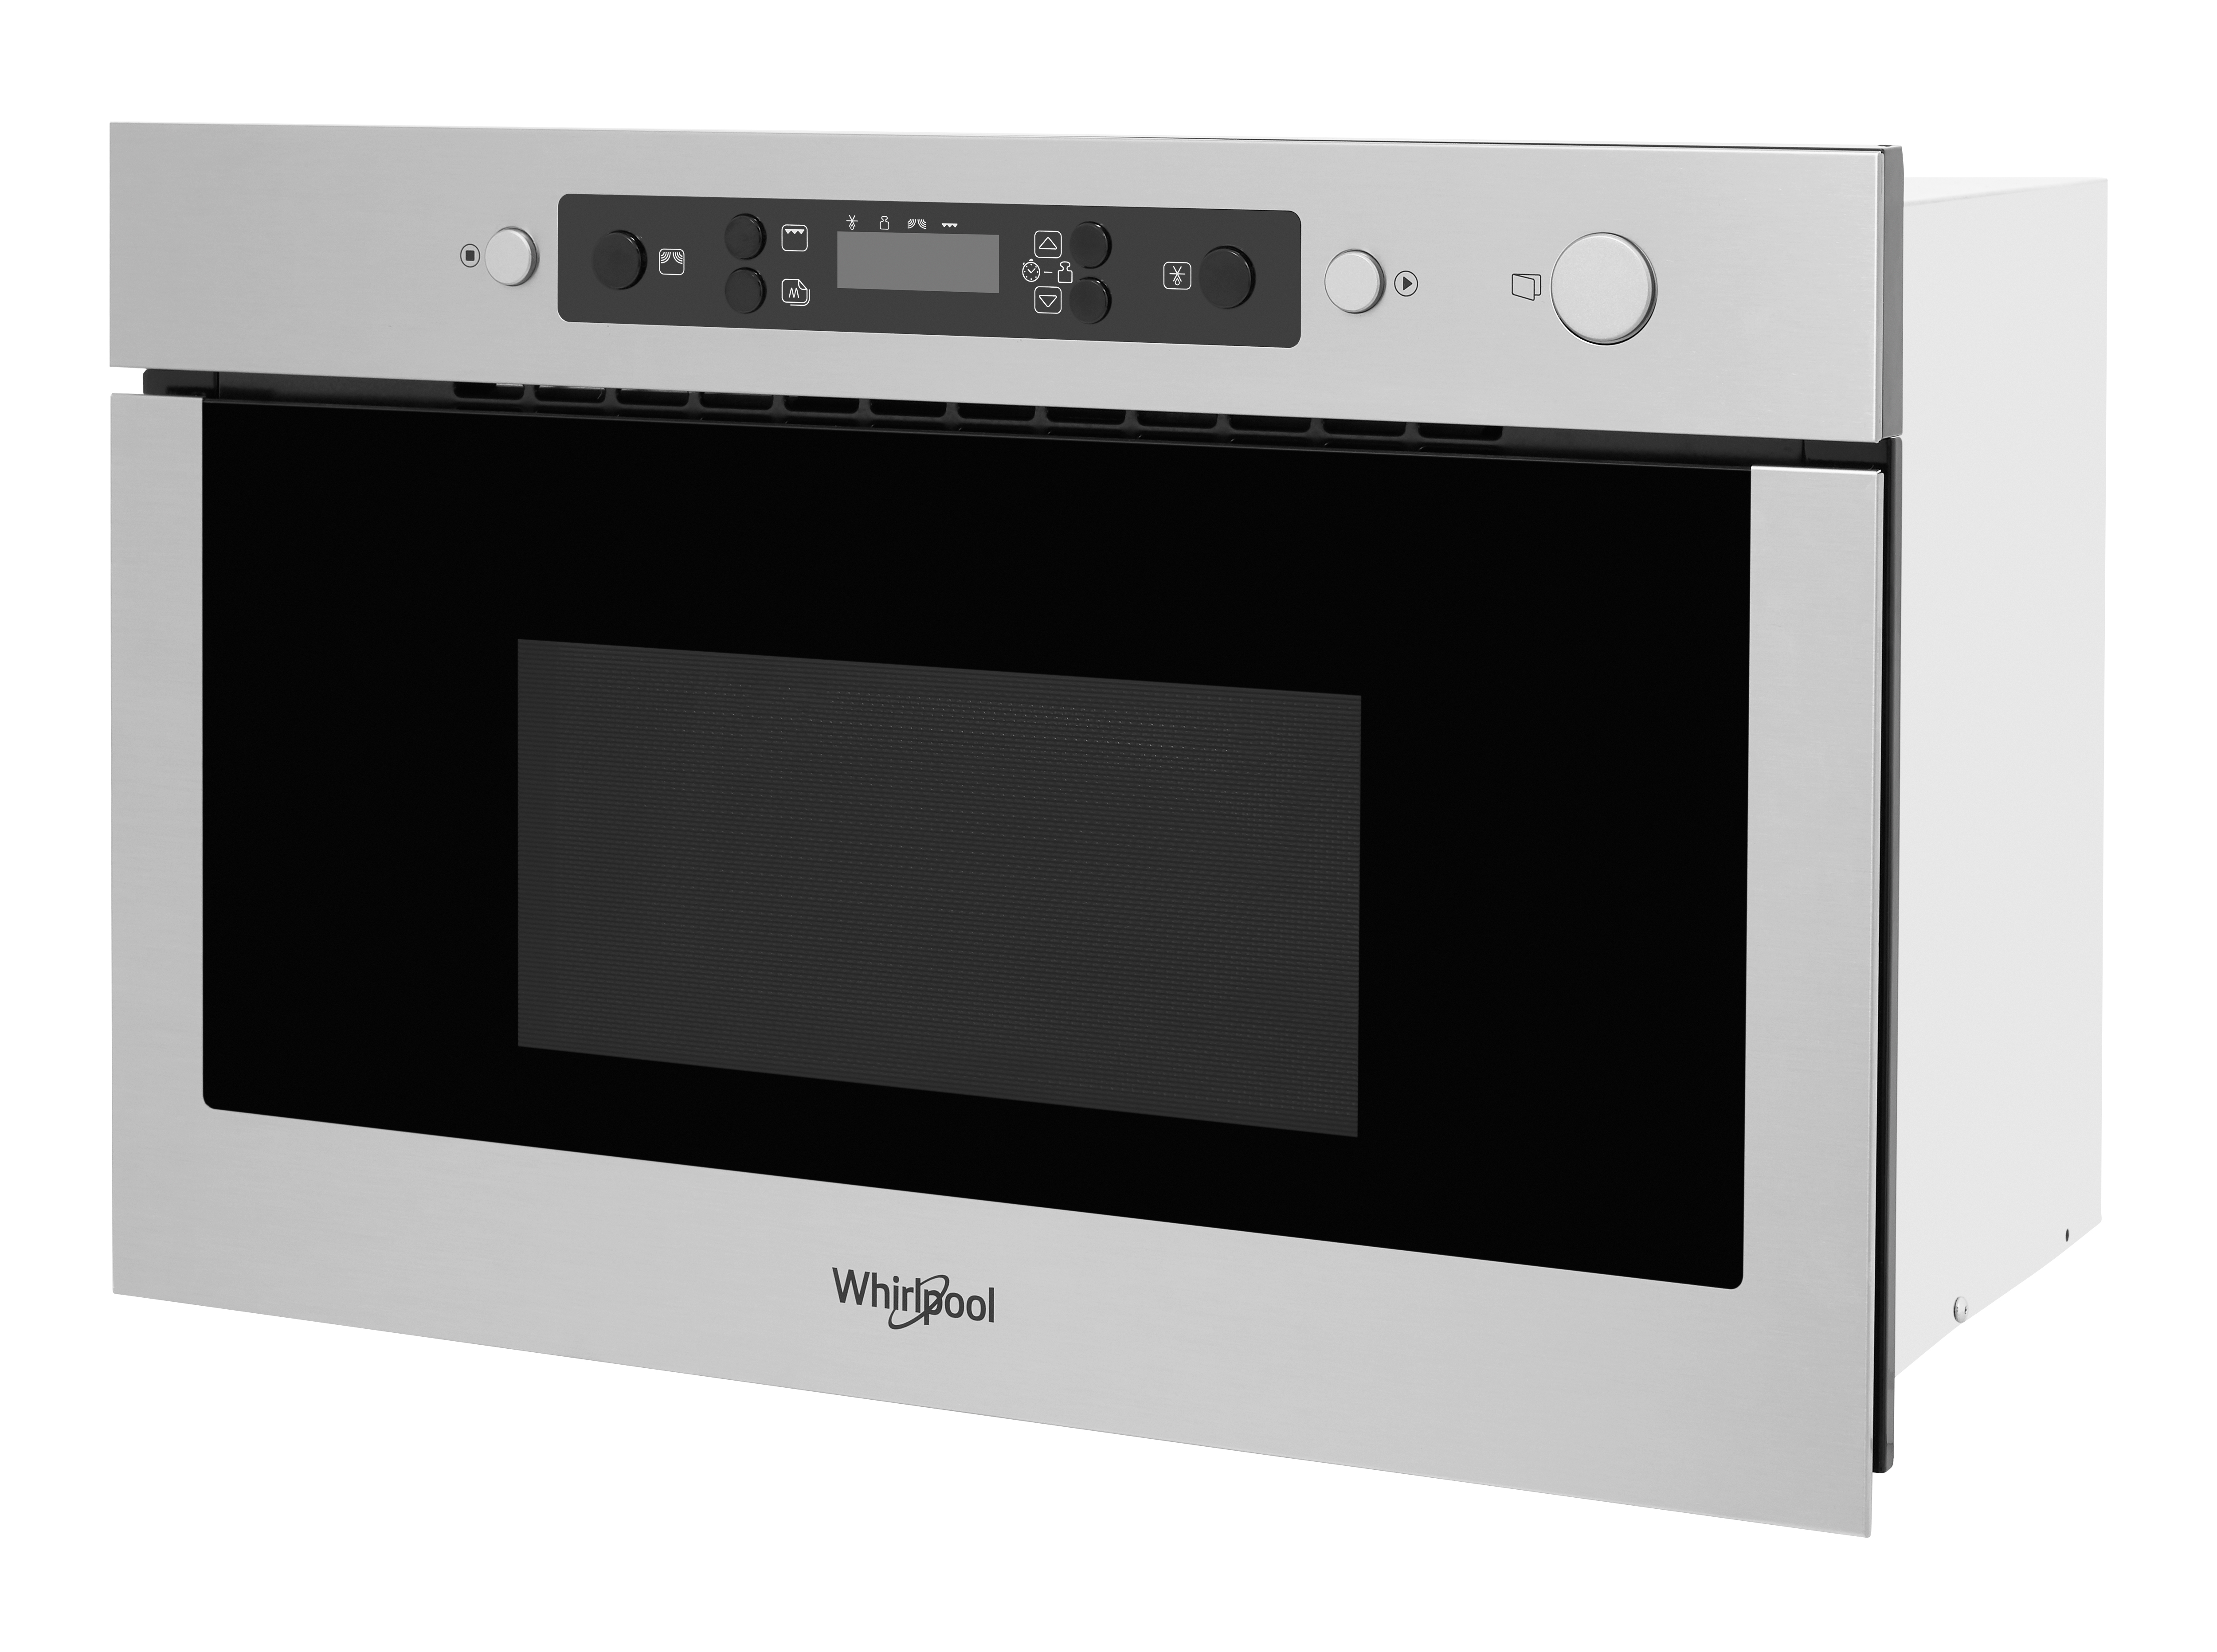 Whirlpool AMW 492 IX Built-in Stainless Steel Microwave with Grill 750 Watt 22 Litre 